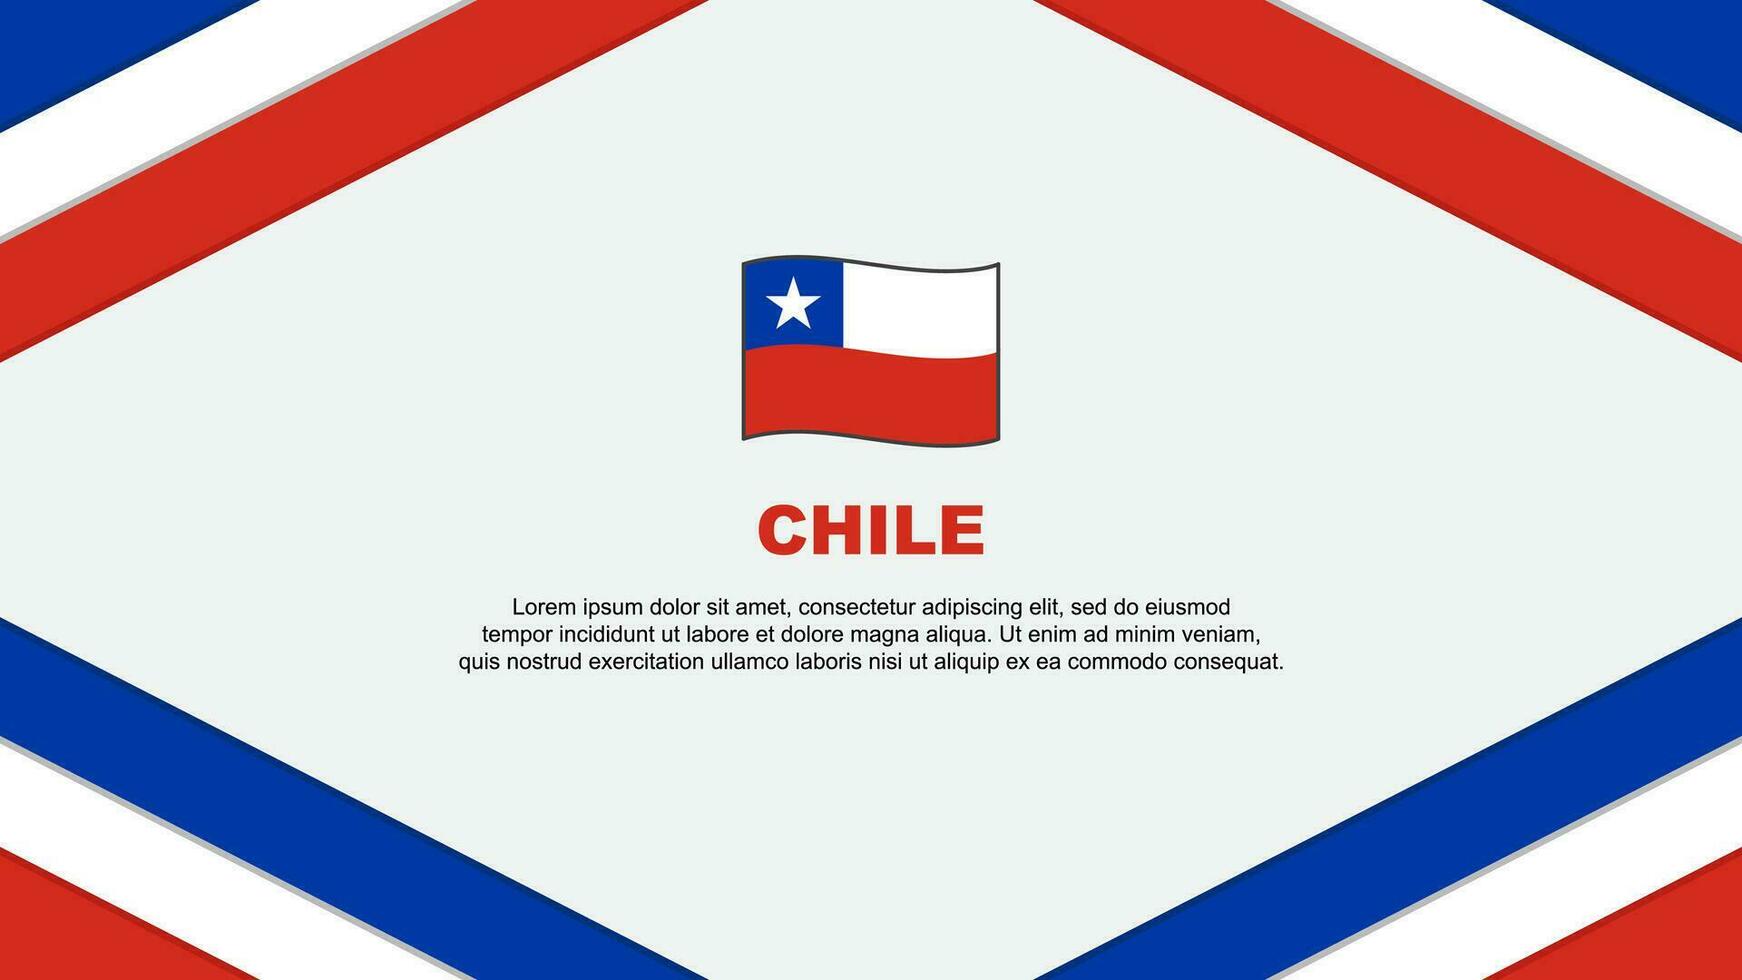 Chile Flag Abstract Background Design Template. Chile Independence Day Banner Cartoon Vector Illustration. Chile Template